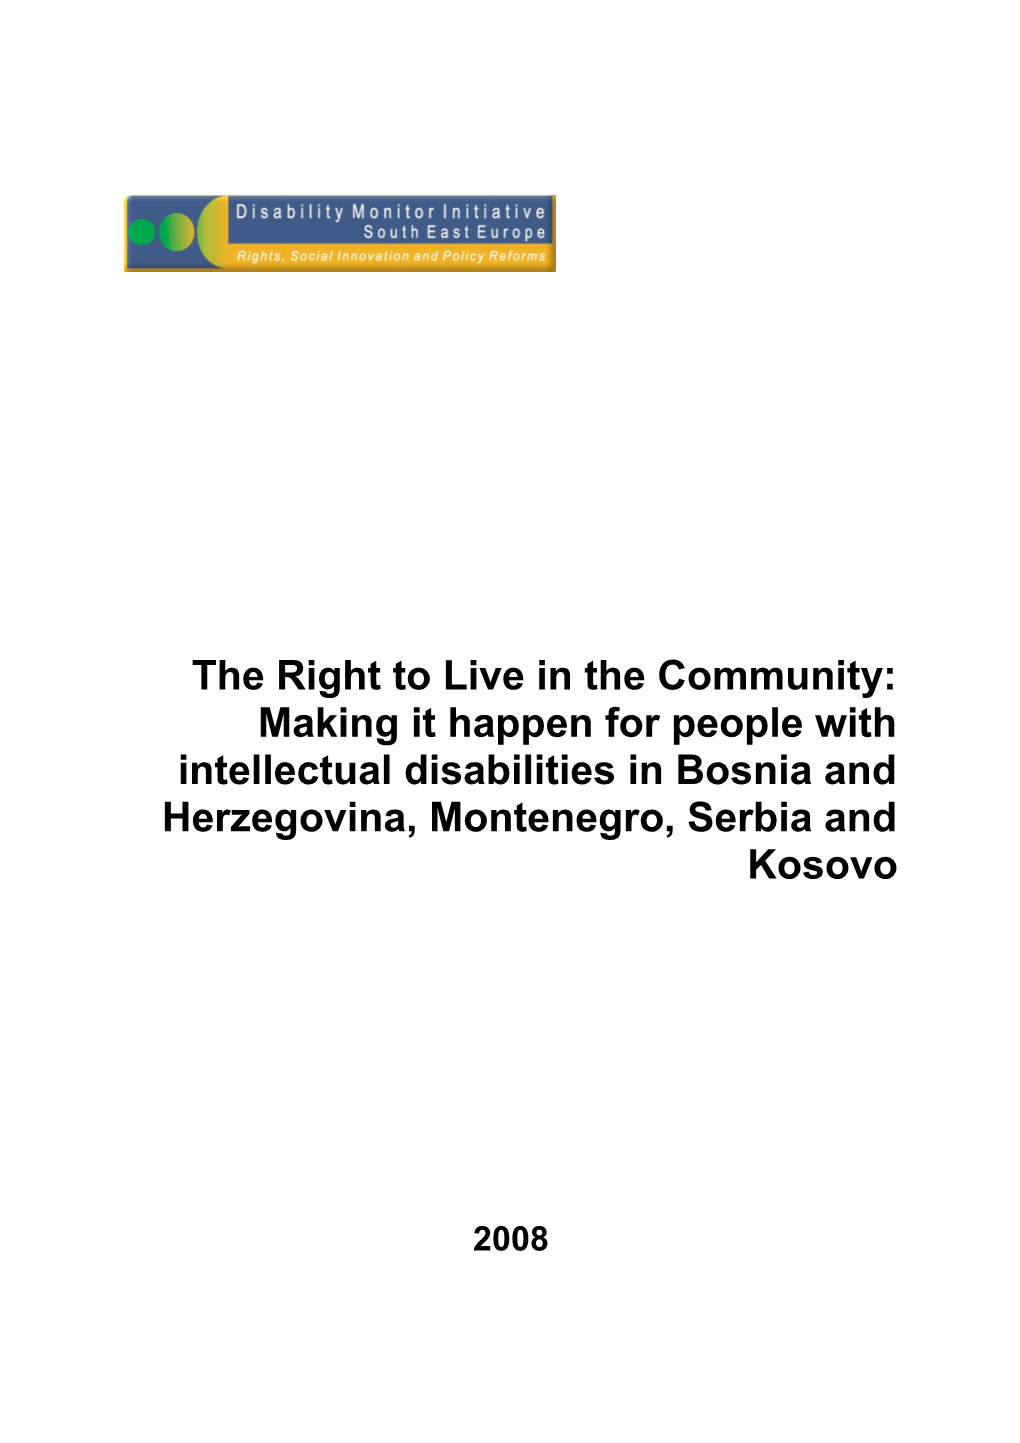 The Right to Live in the Community: Making It Happen for People with Intellectual Disabilities